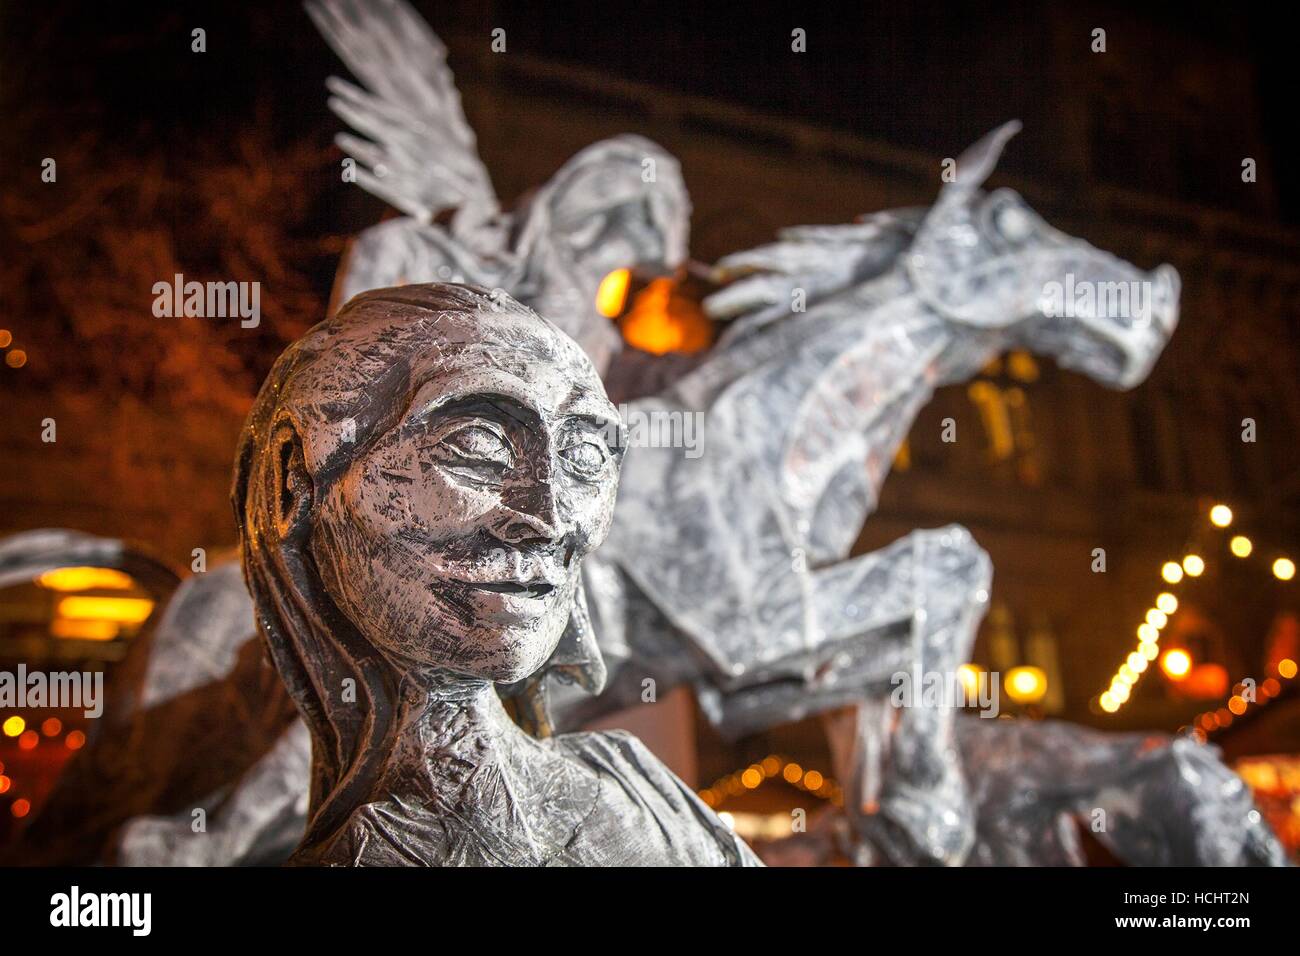 Chester, UK. 8th Dec, 2016. Mid-Winter Watch Parade, Chester's 15th-century tradition of ‘Setting the Watch'. Karamba Samba a ‘ghost band' led a fun parade of skeletons, angels and devils as they celebrated the Winter solstice. This event with dancers, fire breathing and sword fights, dates from the 1400's, where the city leaders would hand over the keys of Chester to the City Watch. Stock Photo